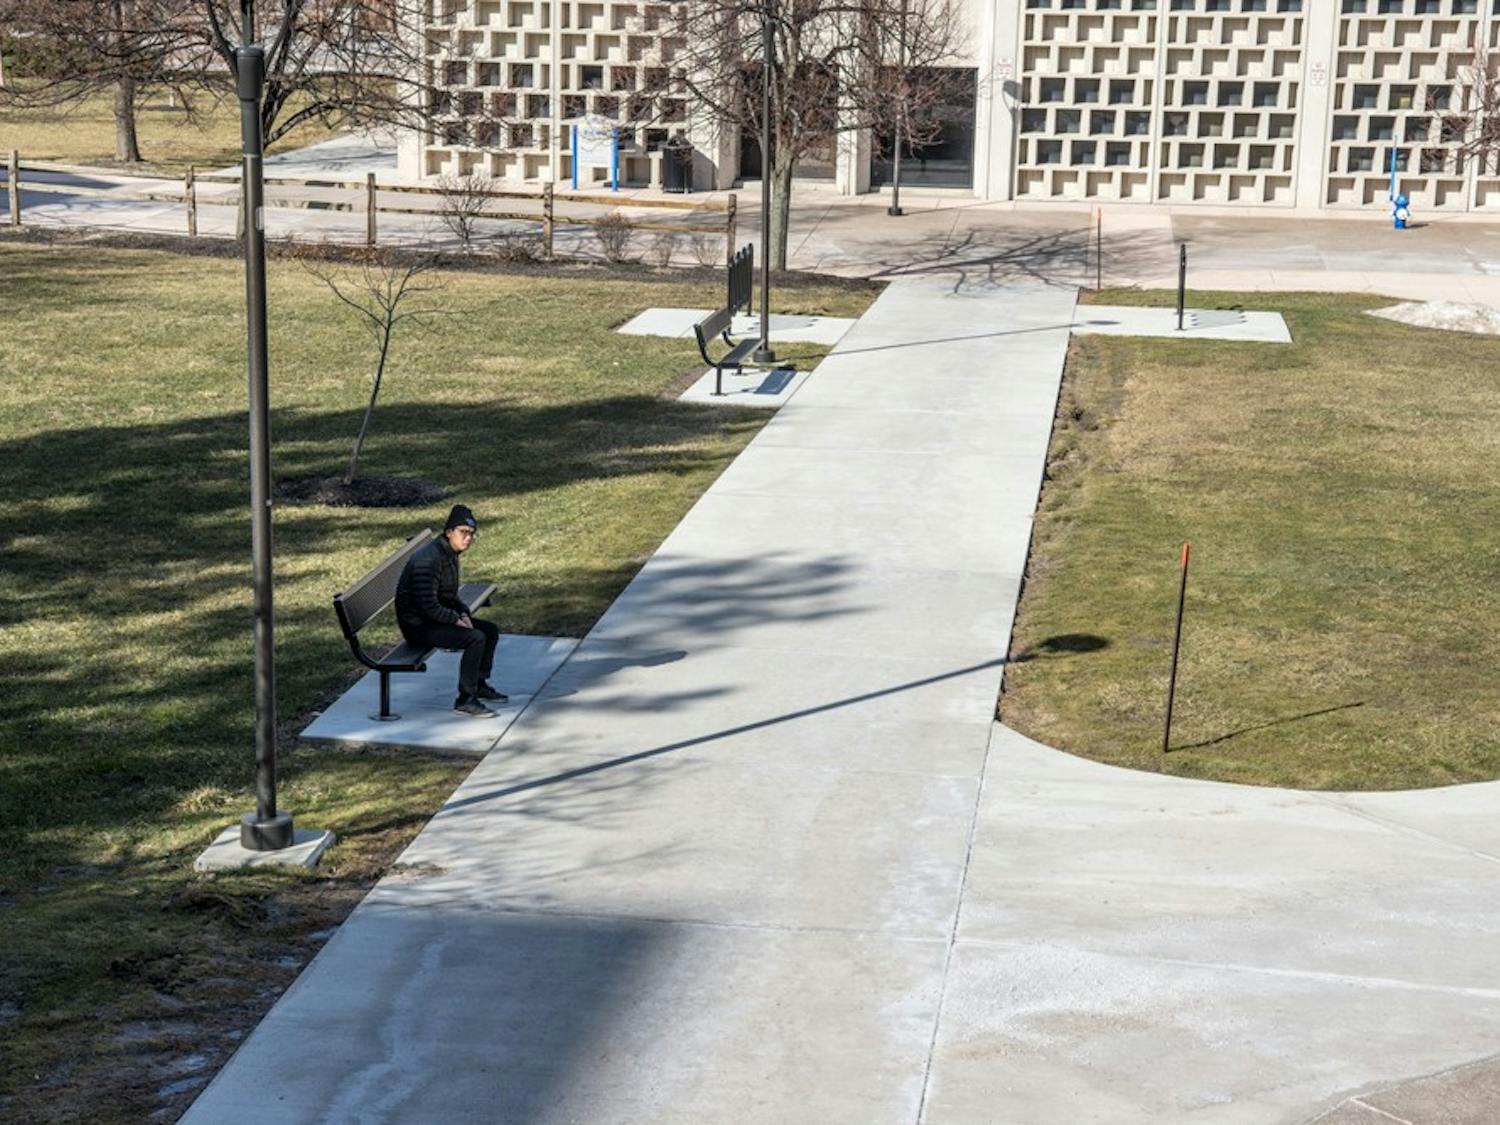 While some students choose to go away for spring break, others choose to stay on campus&nbsp;- free of charge - provided they submit a request to Campus Living in advance.